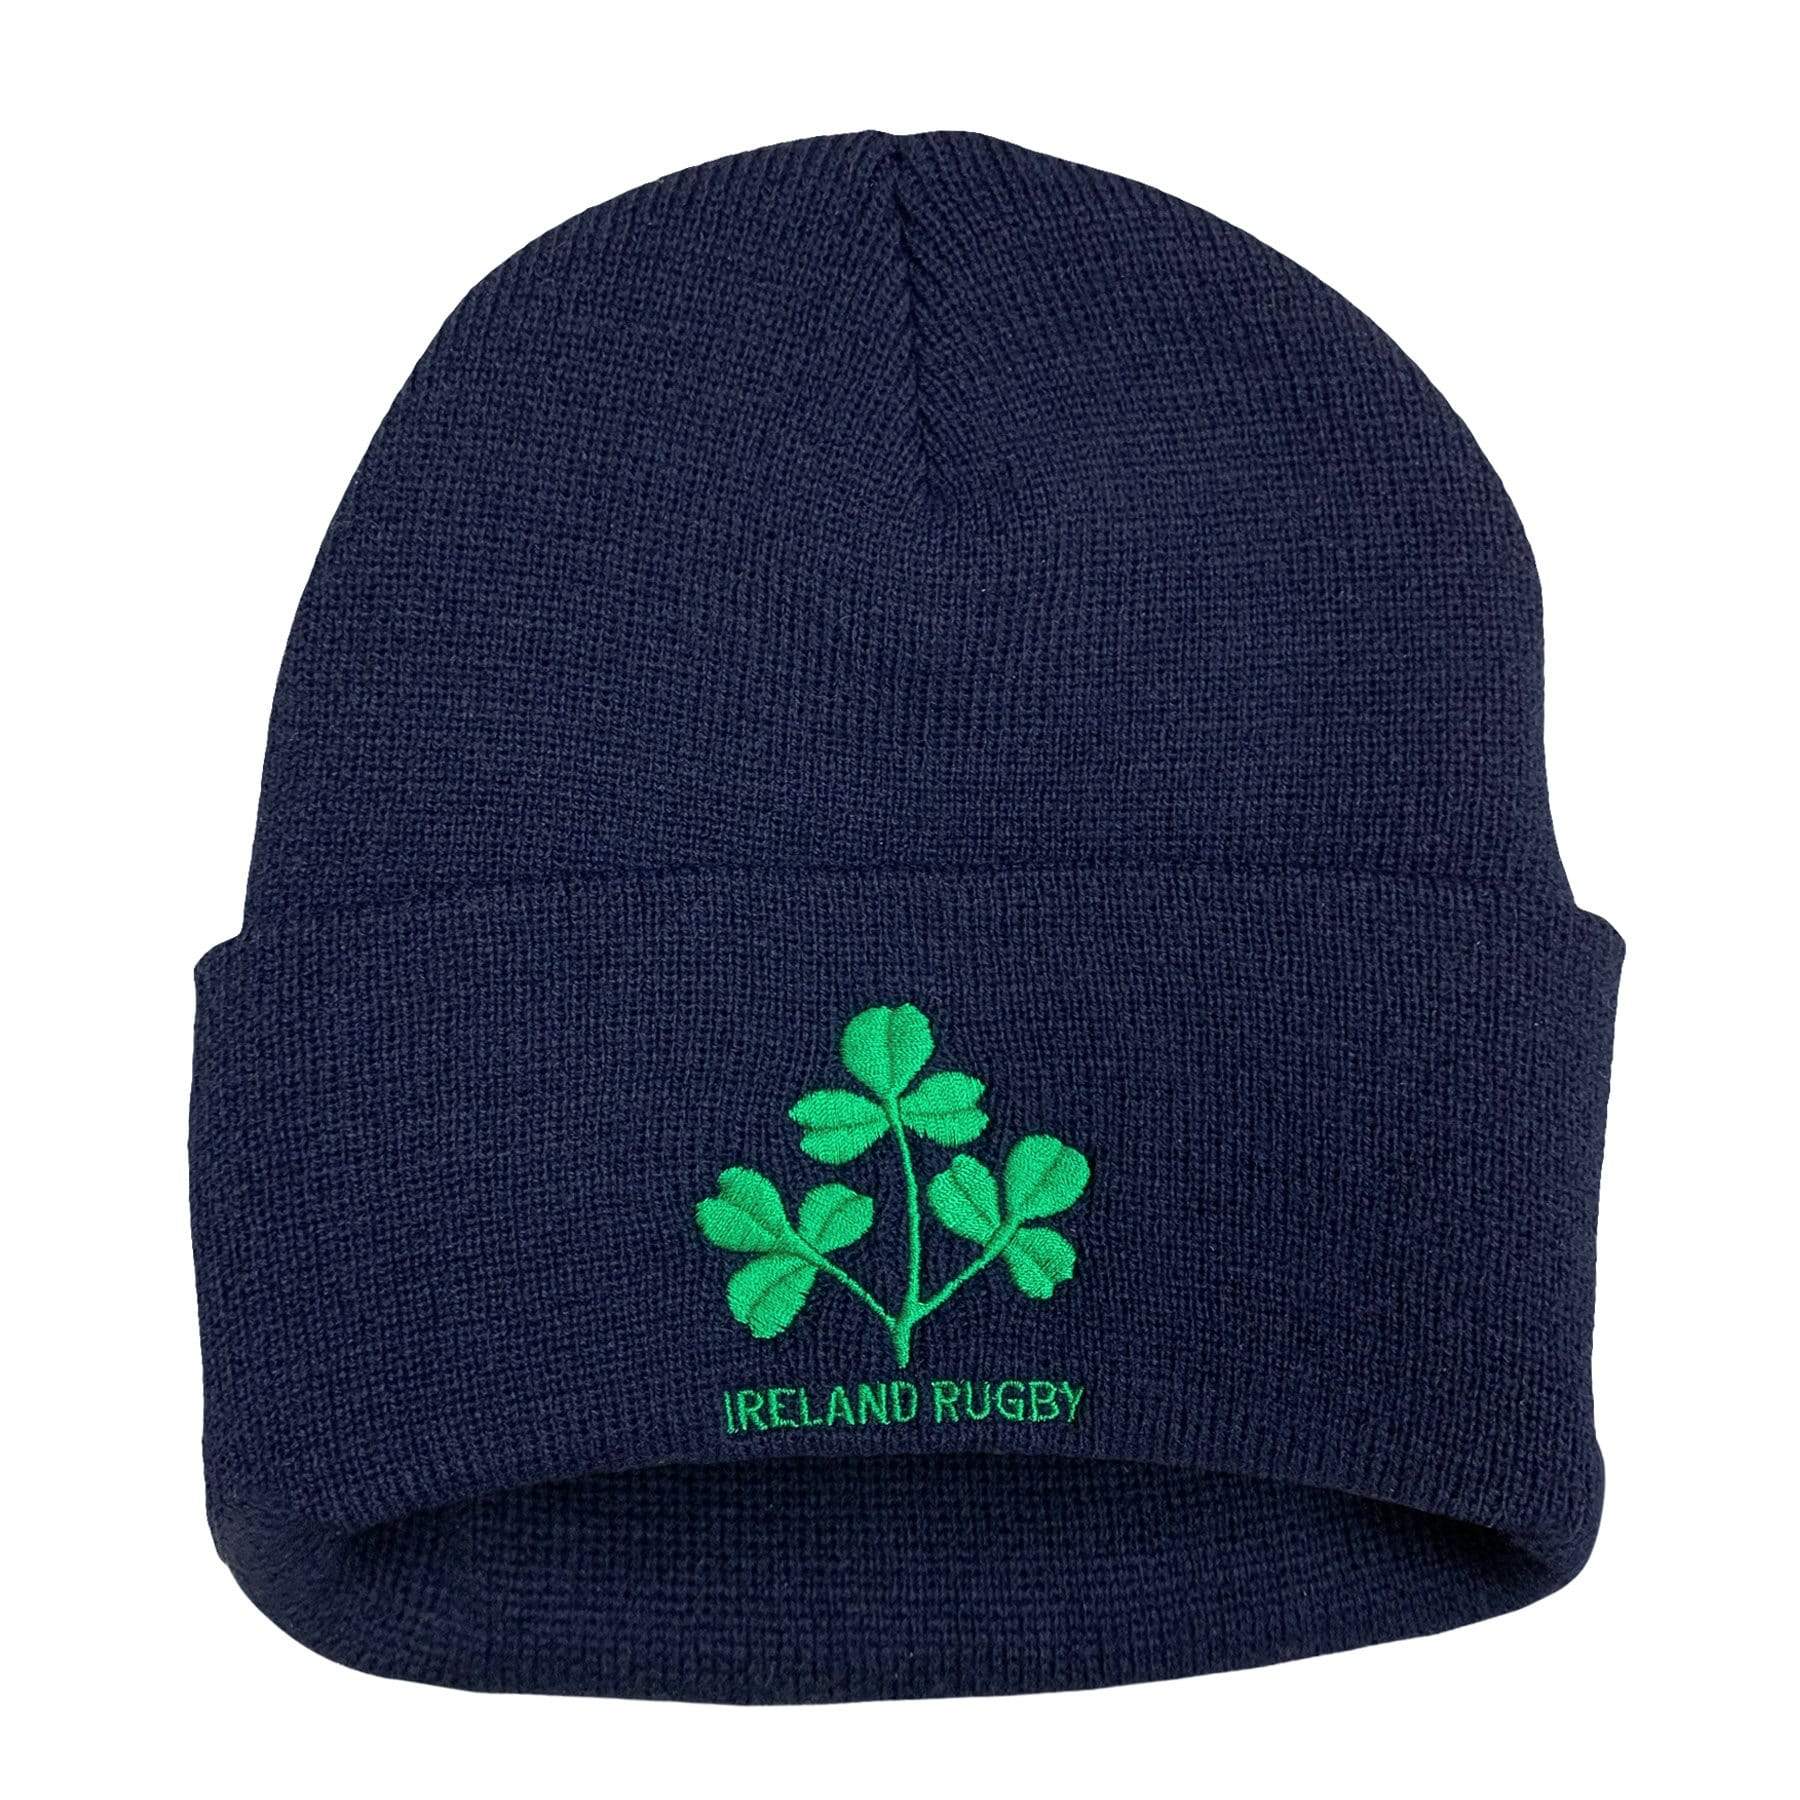 Rugby Imports Ireland Rugby Navy Knit Cap